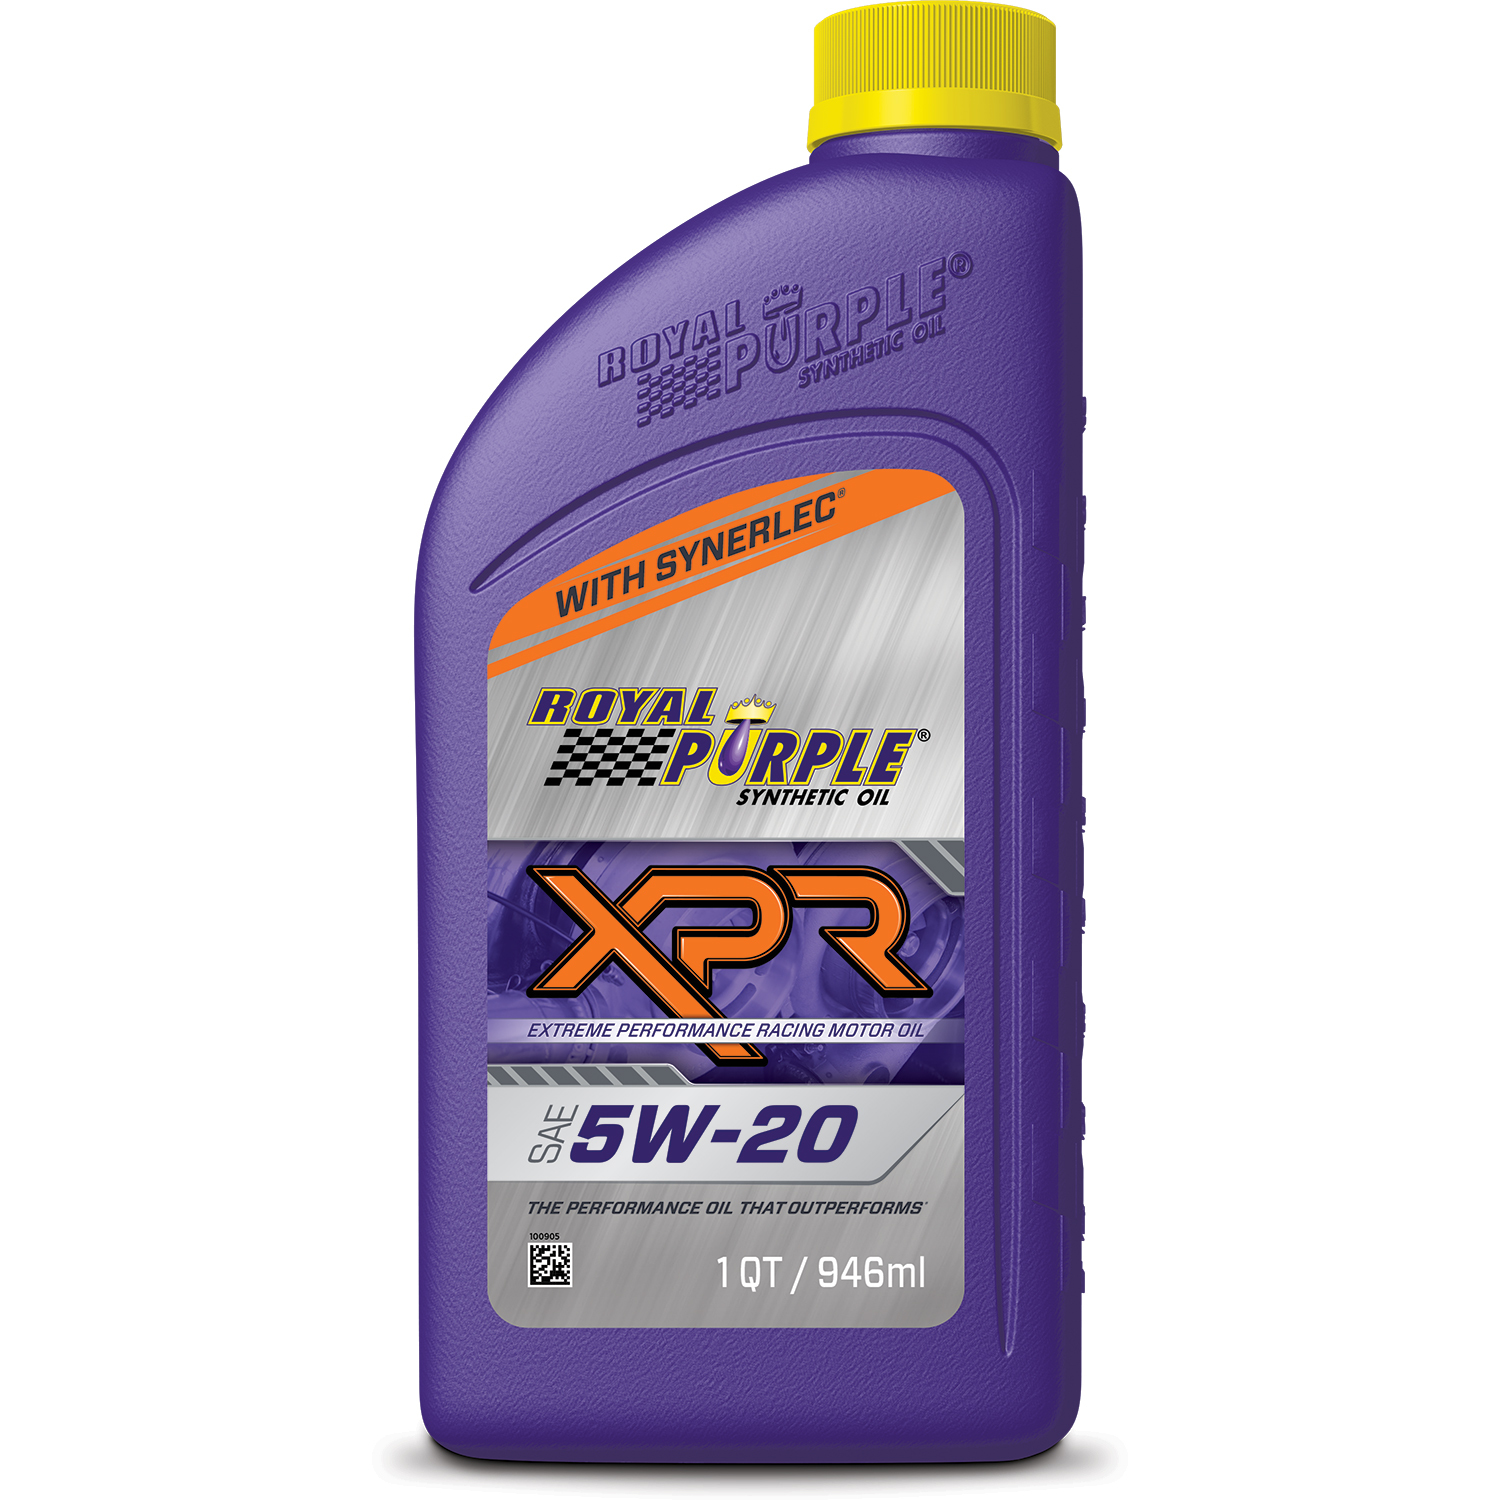 ROYAL PURPLE Motor Oil Extreme Performance Racing 5W20 Synthetic 1 qt Bottle Eac